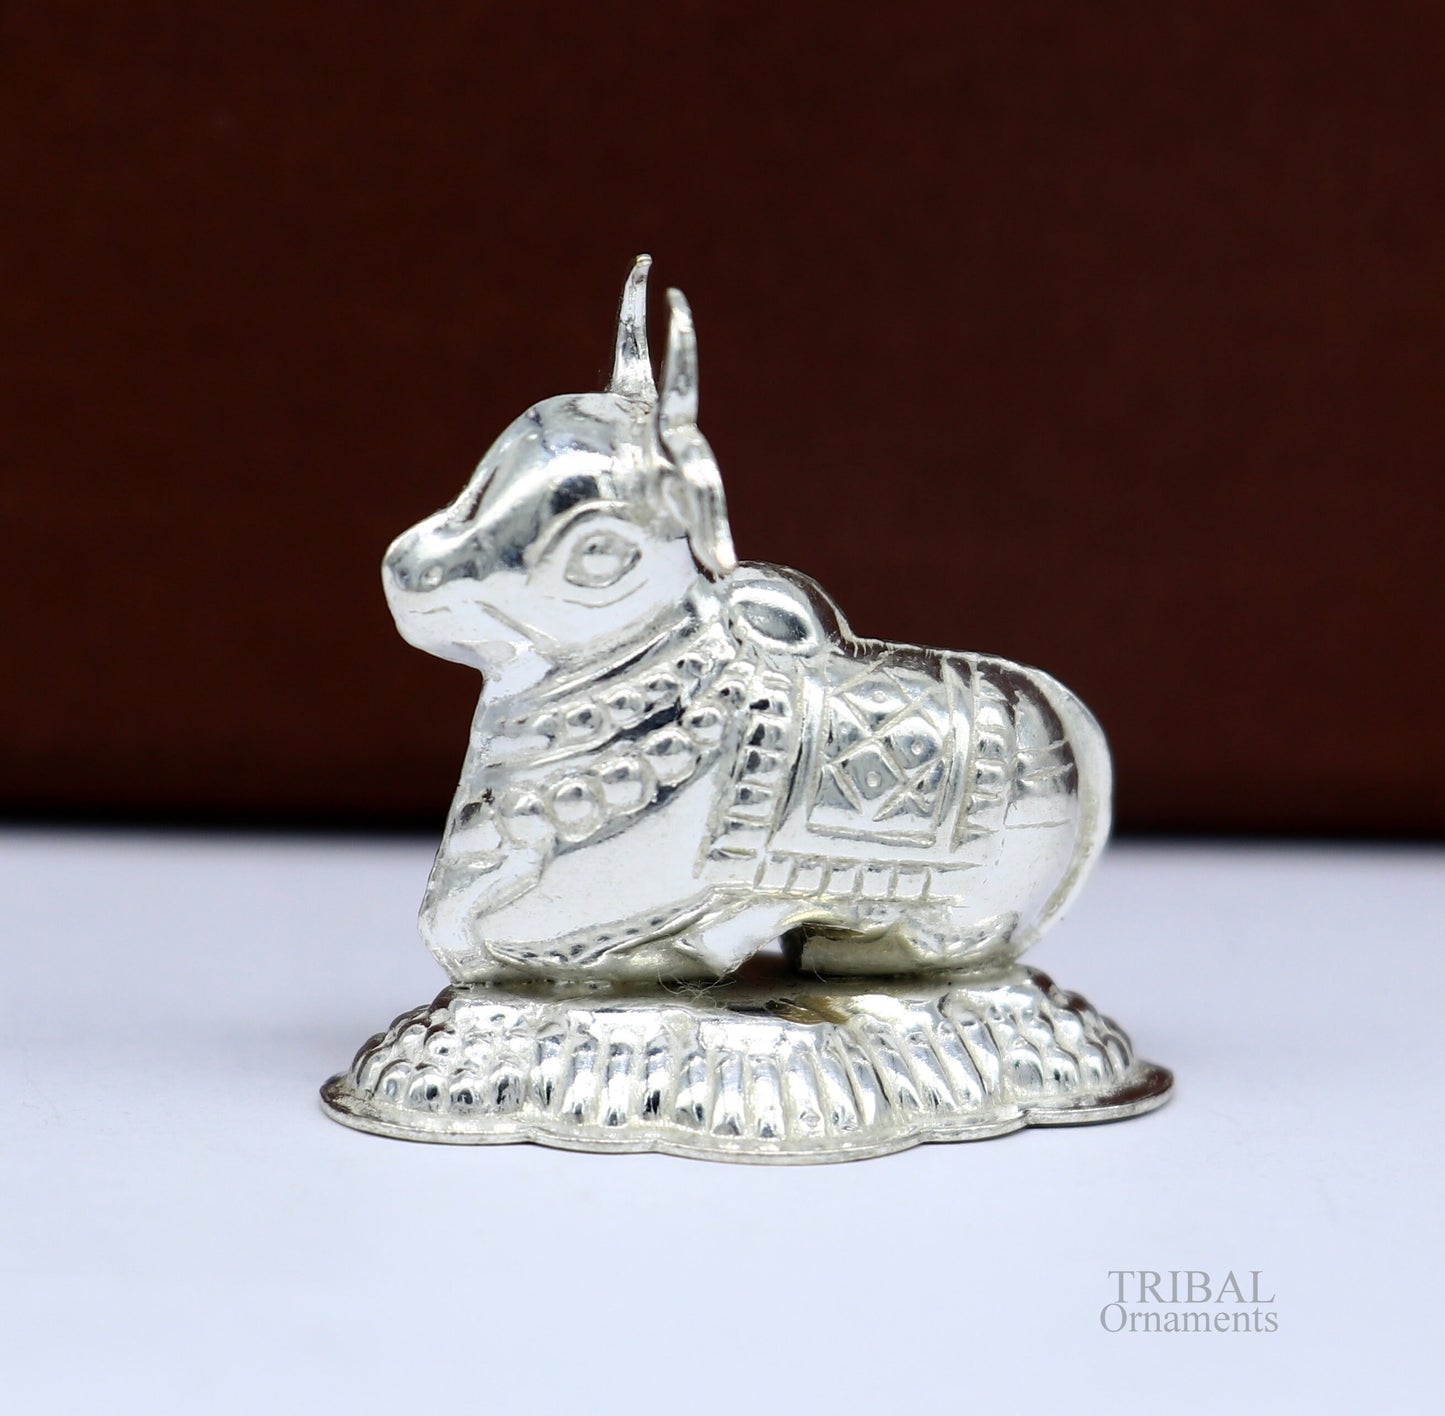 Lord Shiva Vahan Nandi Maharaj sterling silver handmade small article for puja, best gift for lord Shiva, divine statue su613 - TRIBAL ORNAMENTS